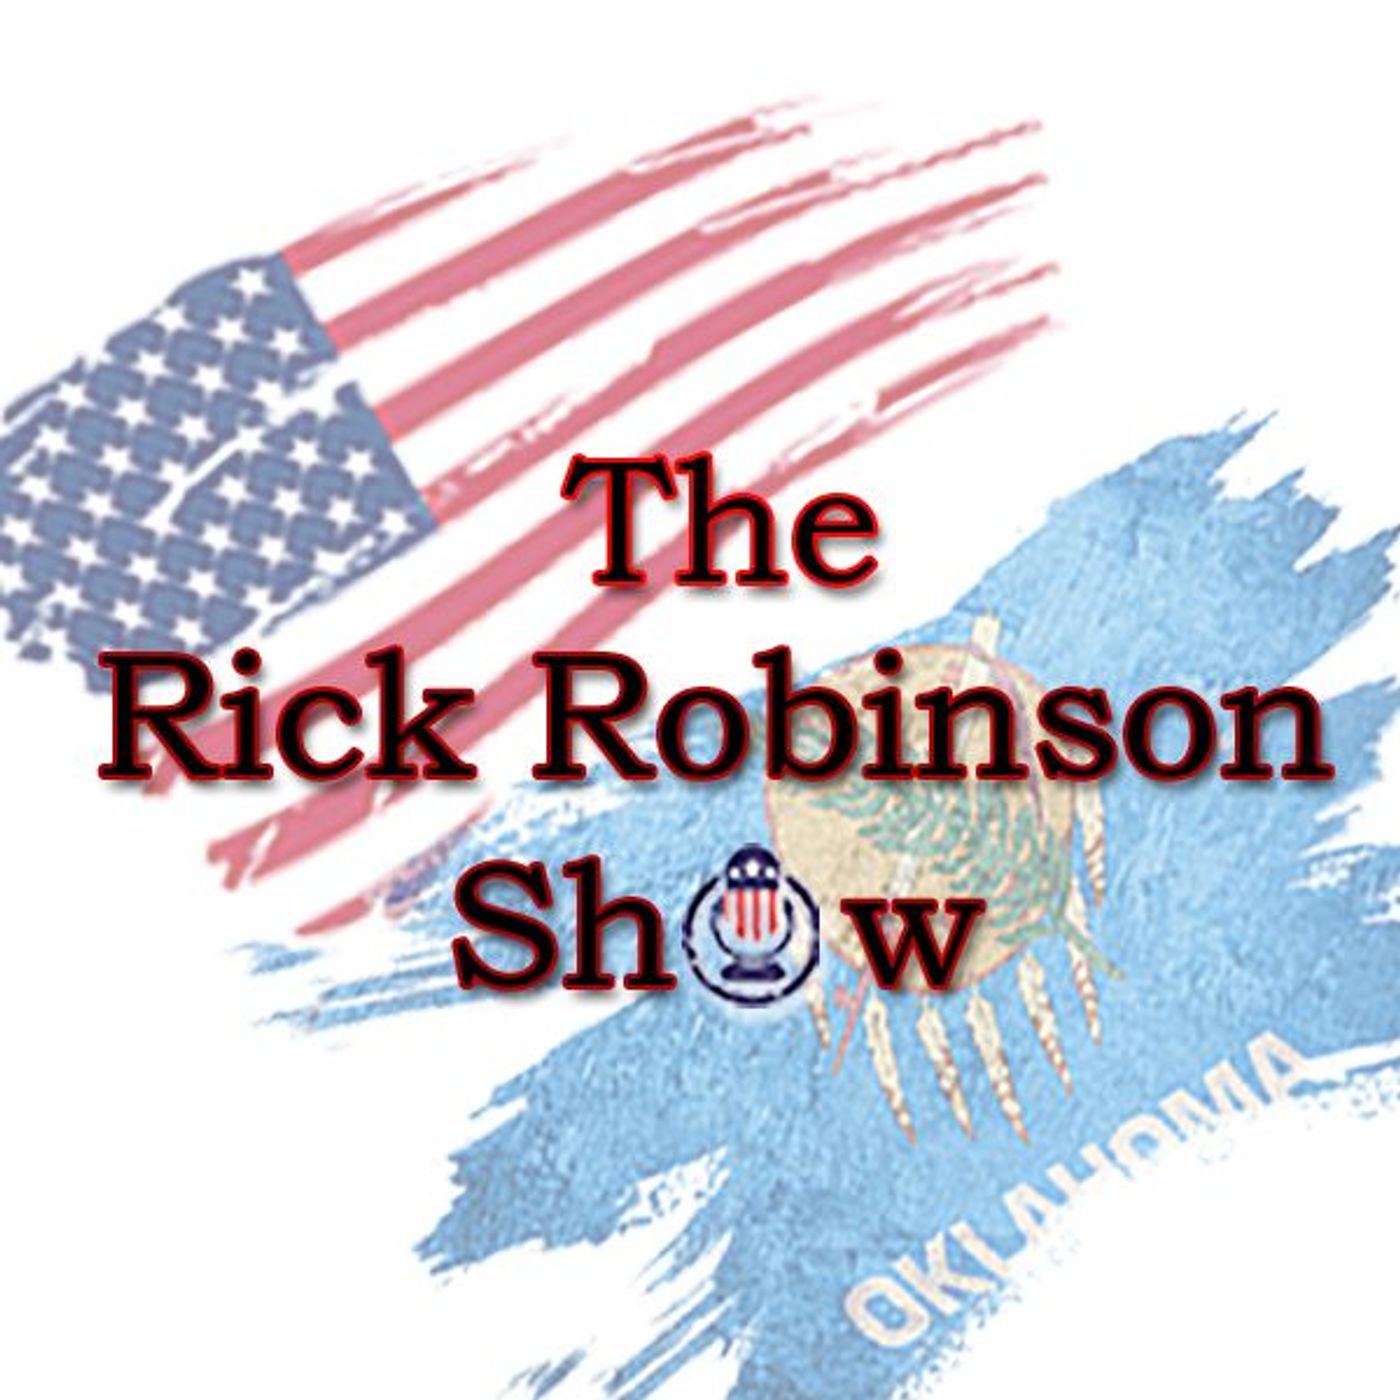 Presents -- The Rick Robinson Show -- It's Been Awhile so Lets Talk About All the Ways Our Nation is Falling Apart